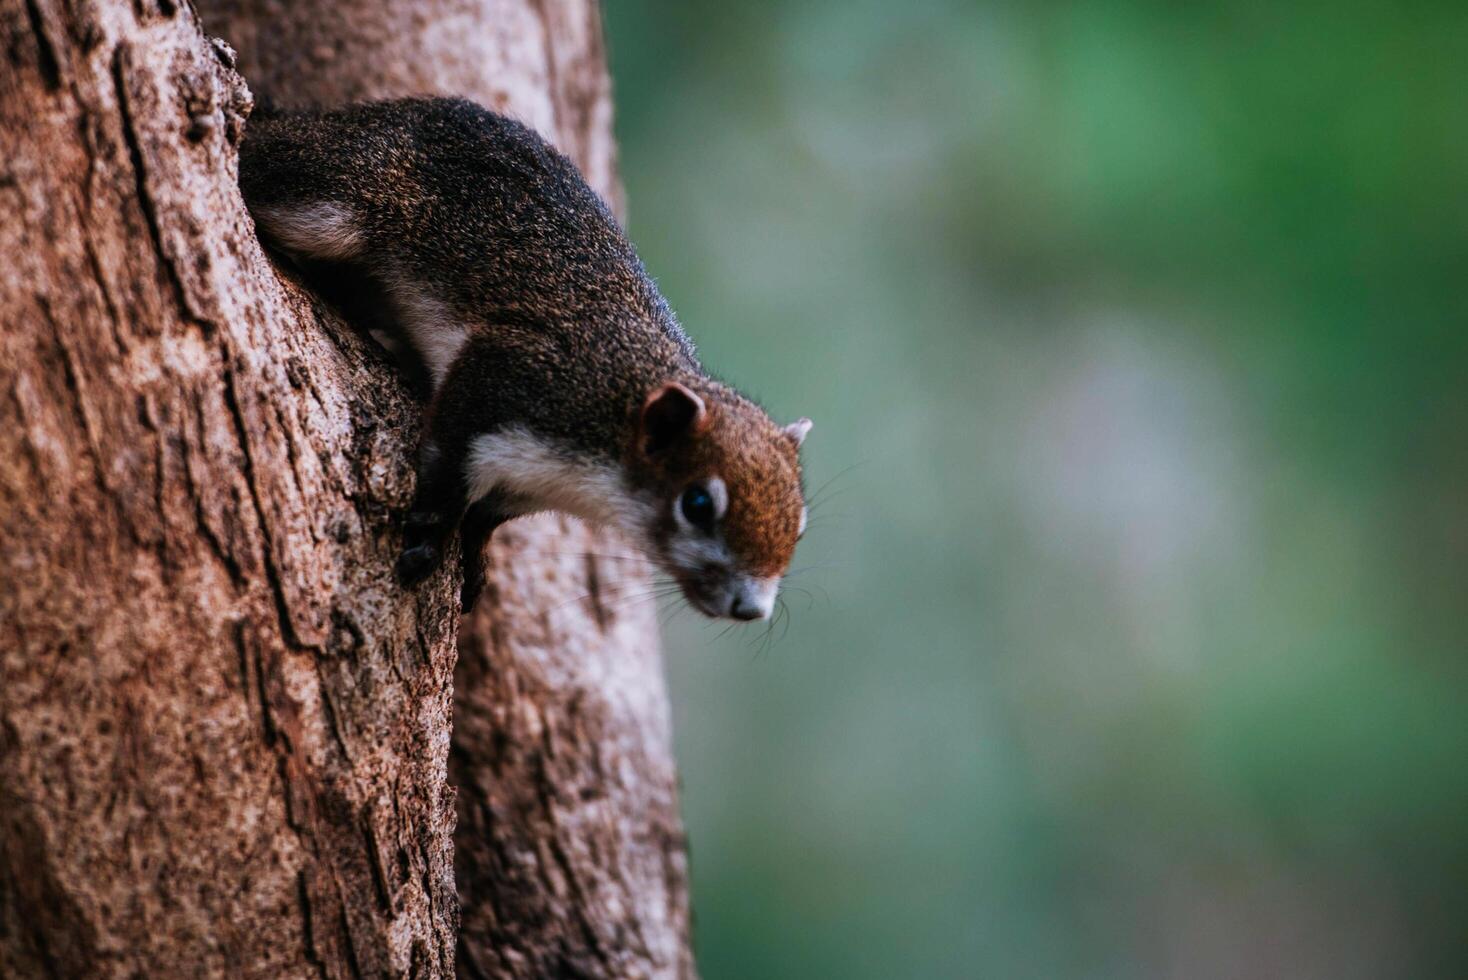 Squirrels eat hazelnuts on green trees in the forest. Mammals photo